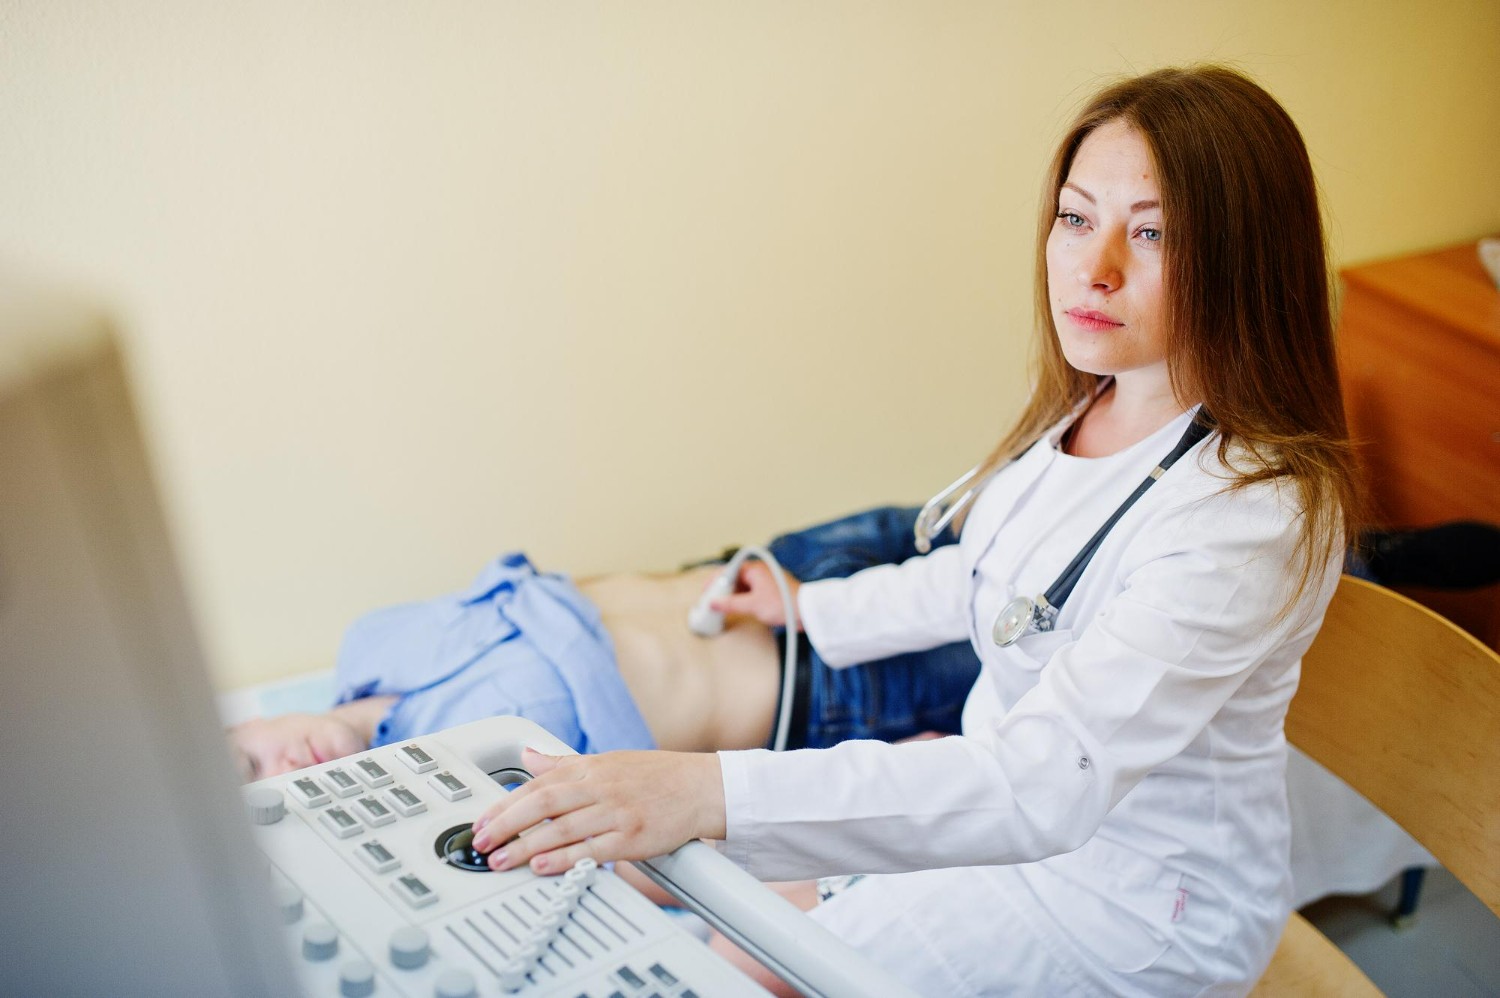 Benefits of Ultrasound Uterus Before Pregnancy, Let’s Check More!